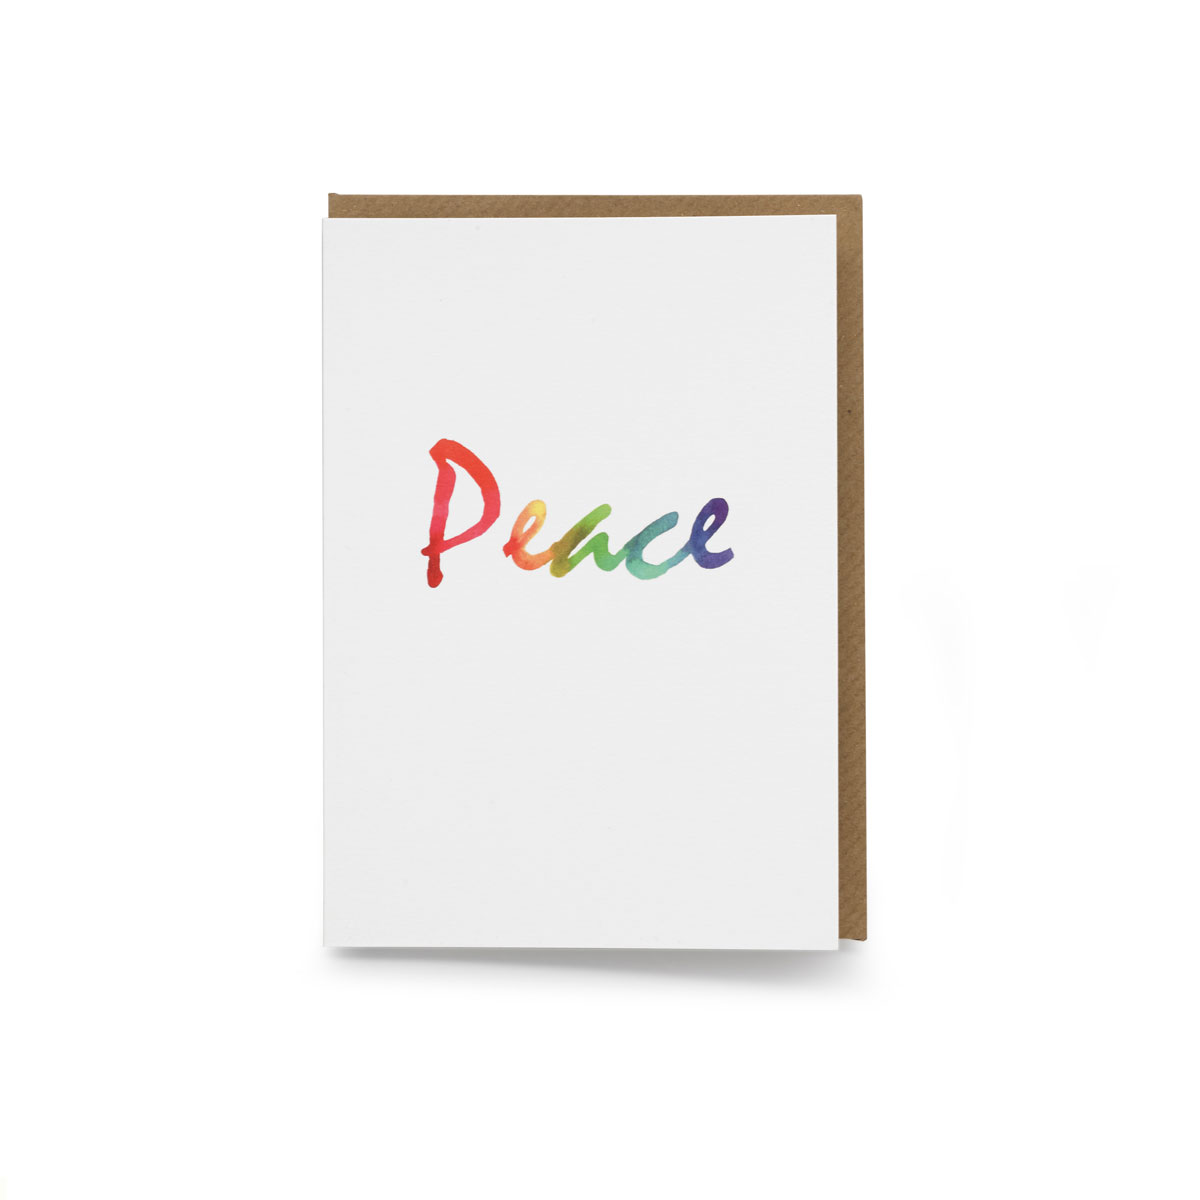 PEACE TEXT PRINTED ON 300 GSM PAPER